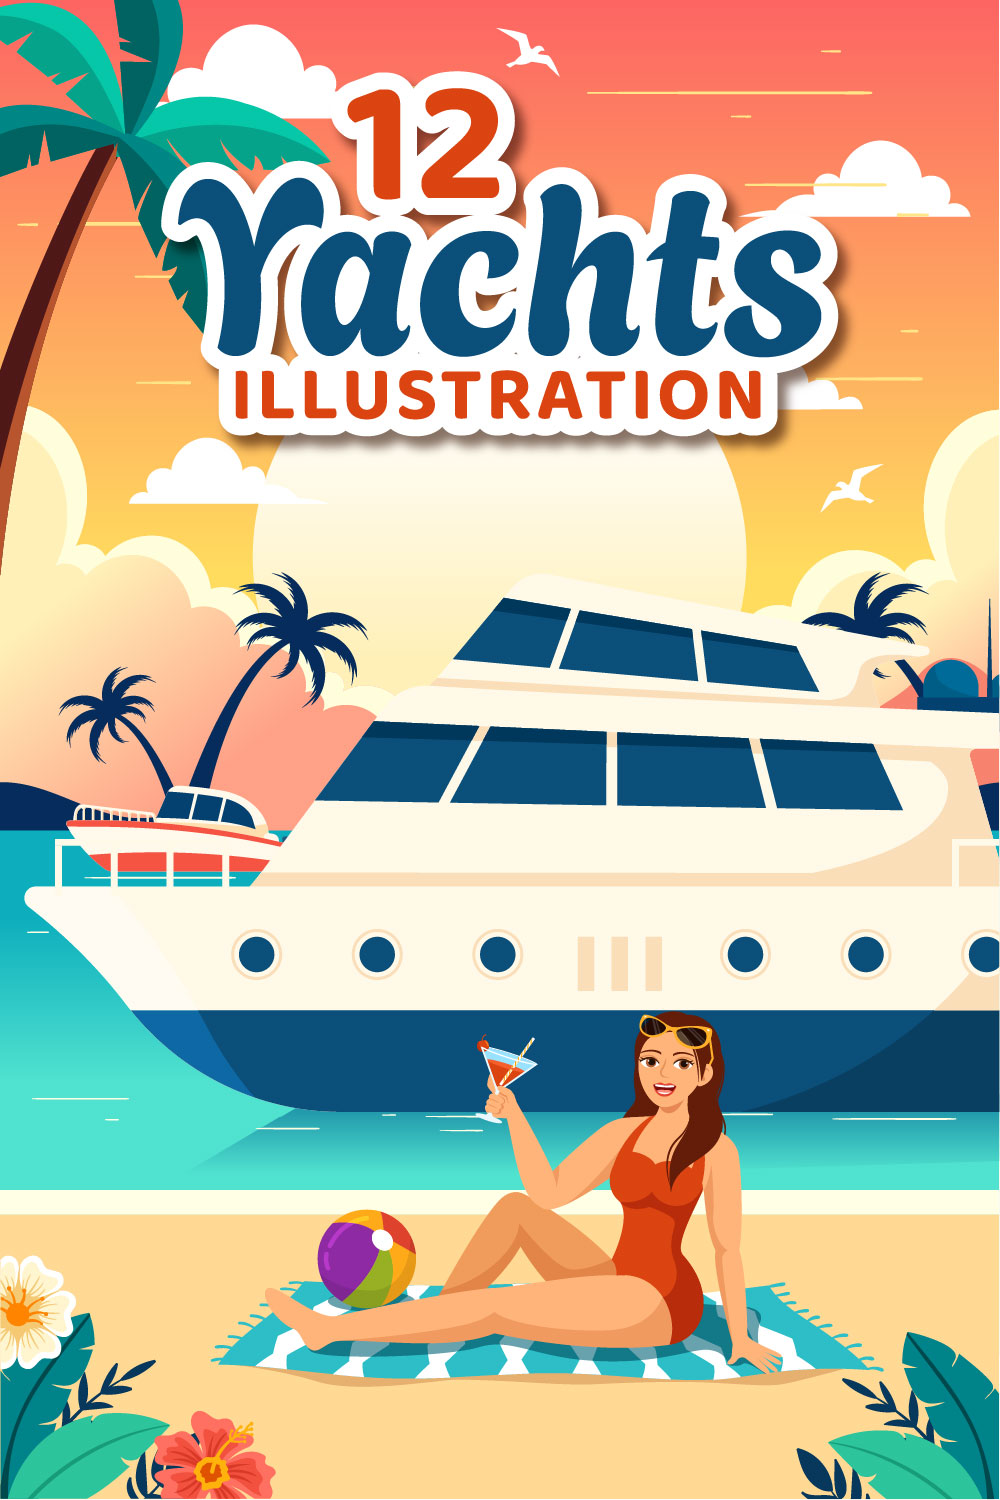 12 Yachts Illustration pinterest preview image.